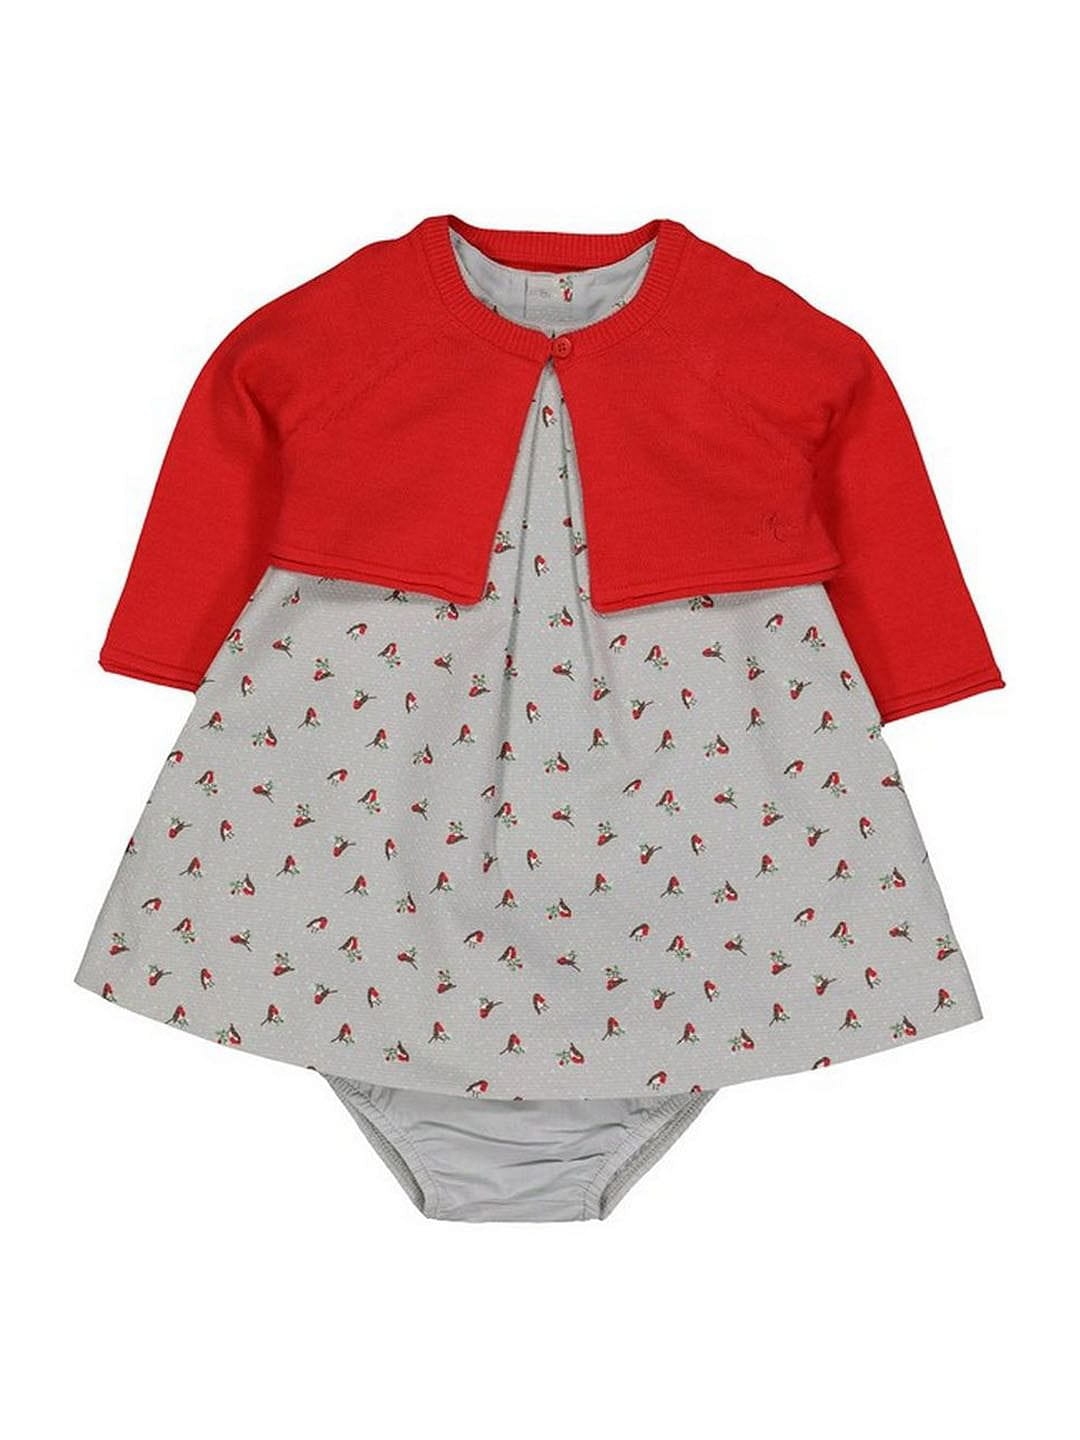 Grey and Red Printed Twin Set